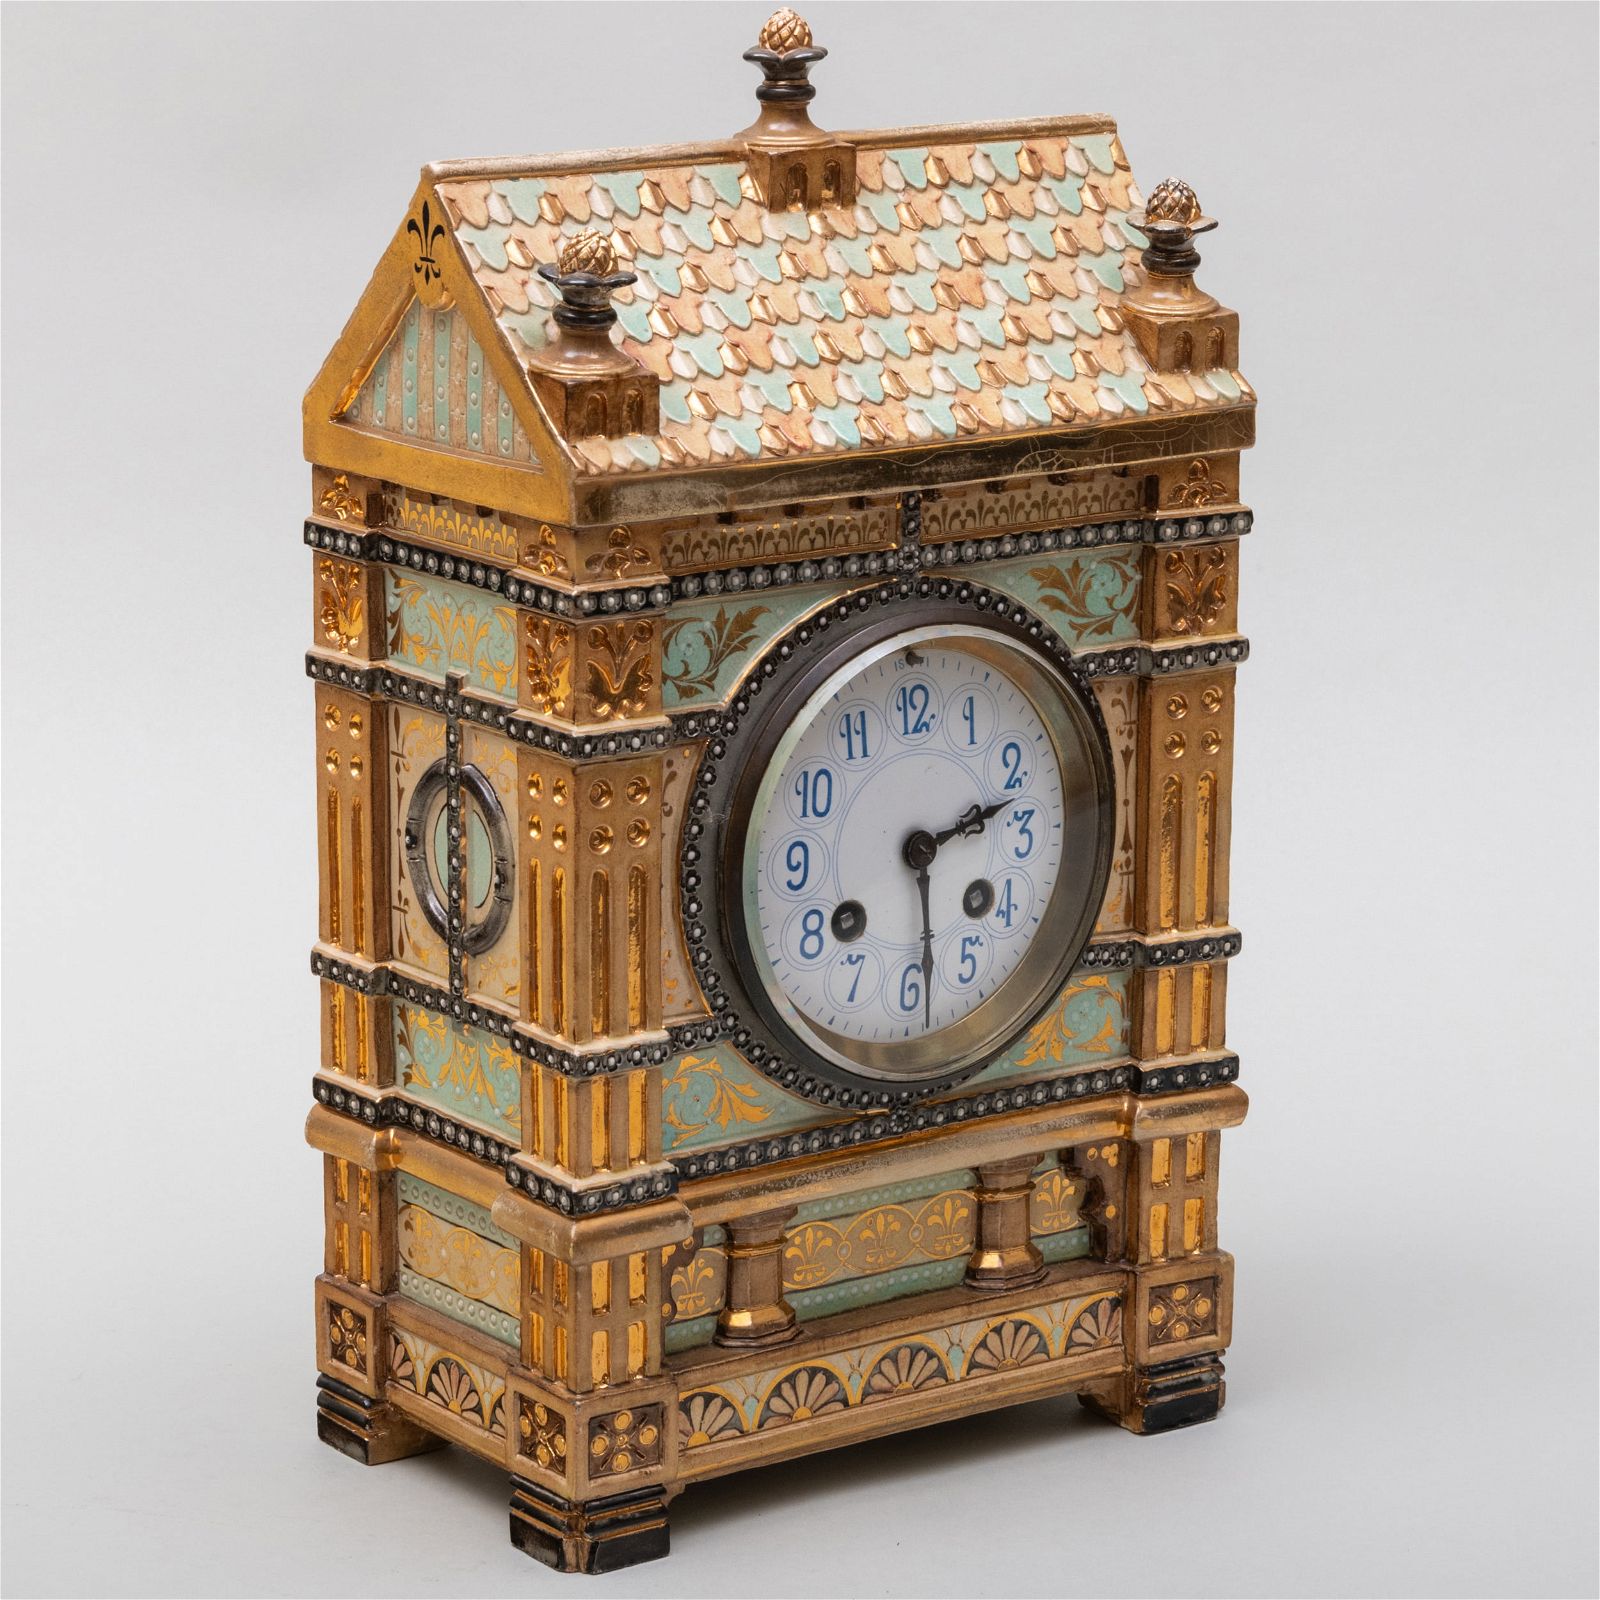 Royal Doulton stoneware clock to a design by William Burges, dating to 1888 and estimated at $1,200-$1,800 at Stair Galleries.